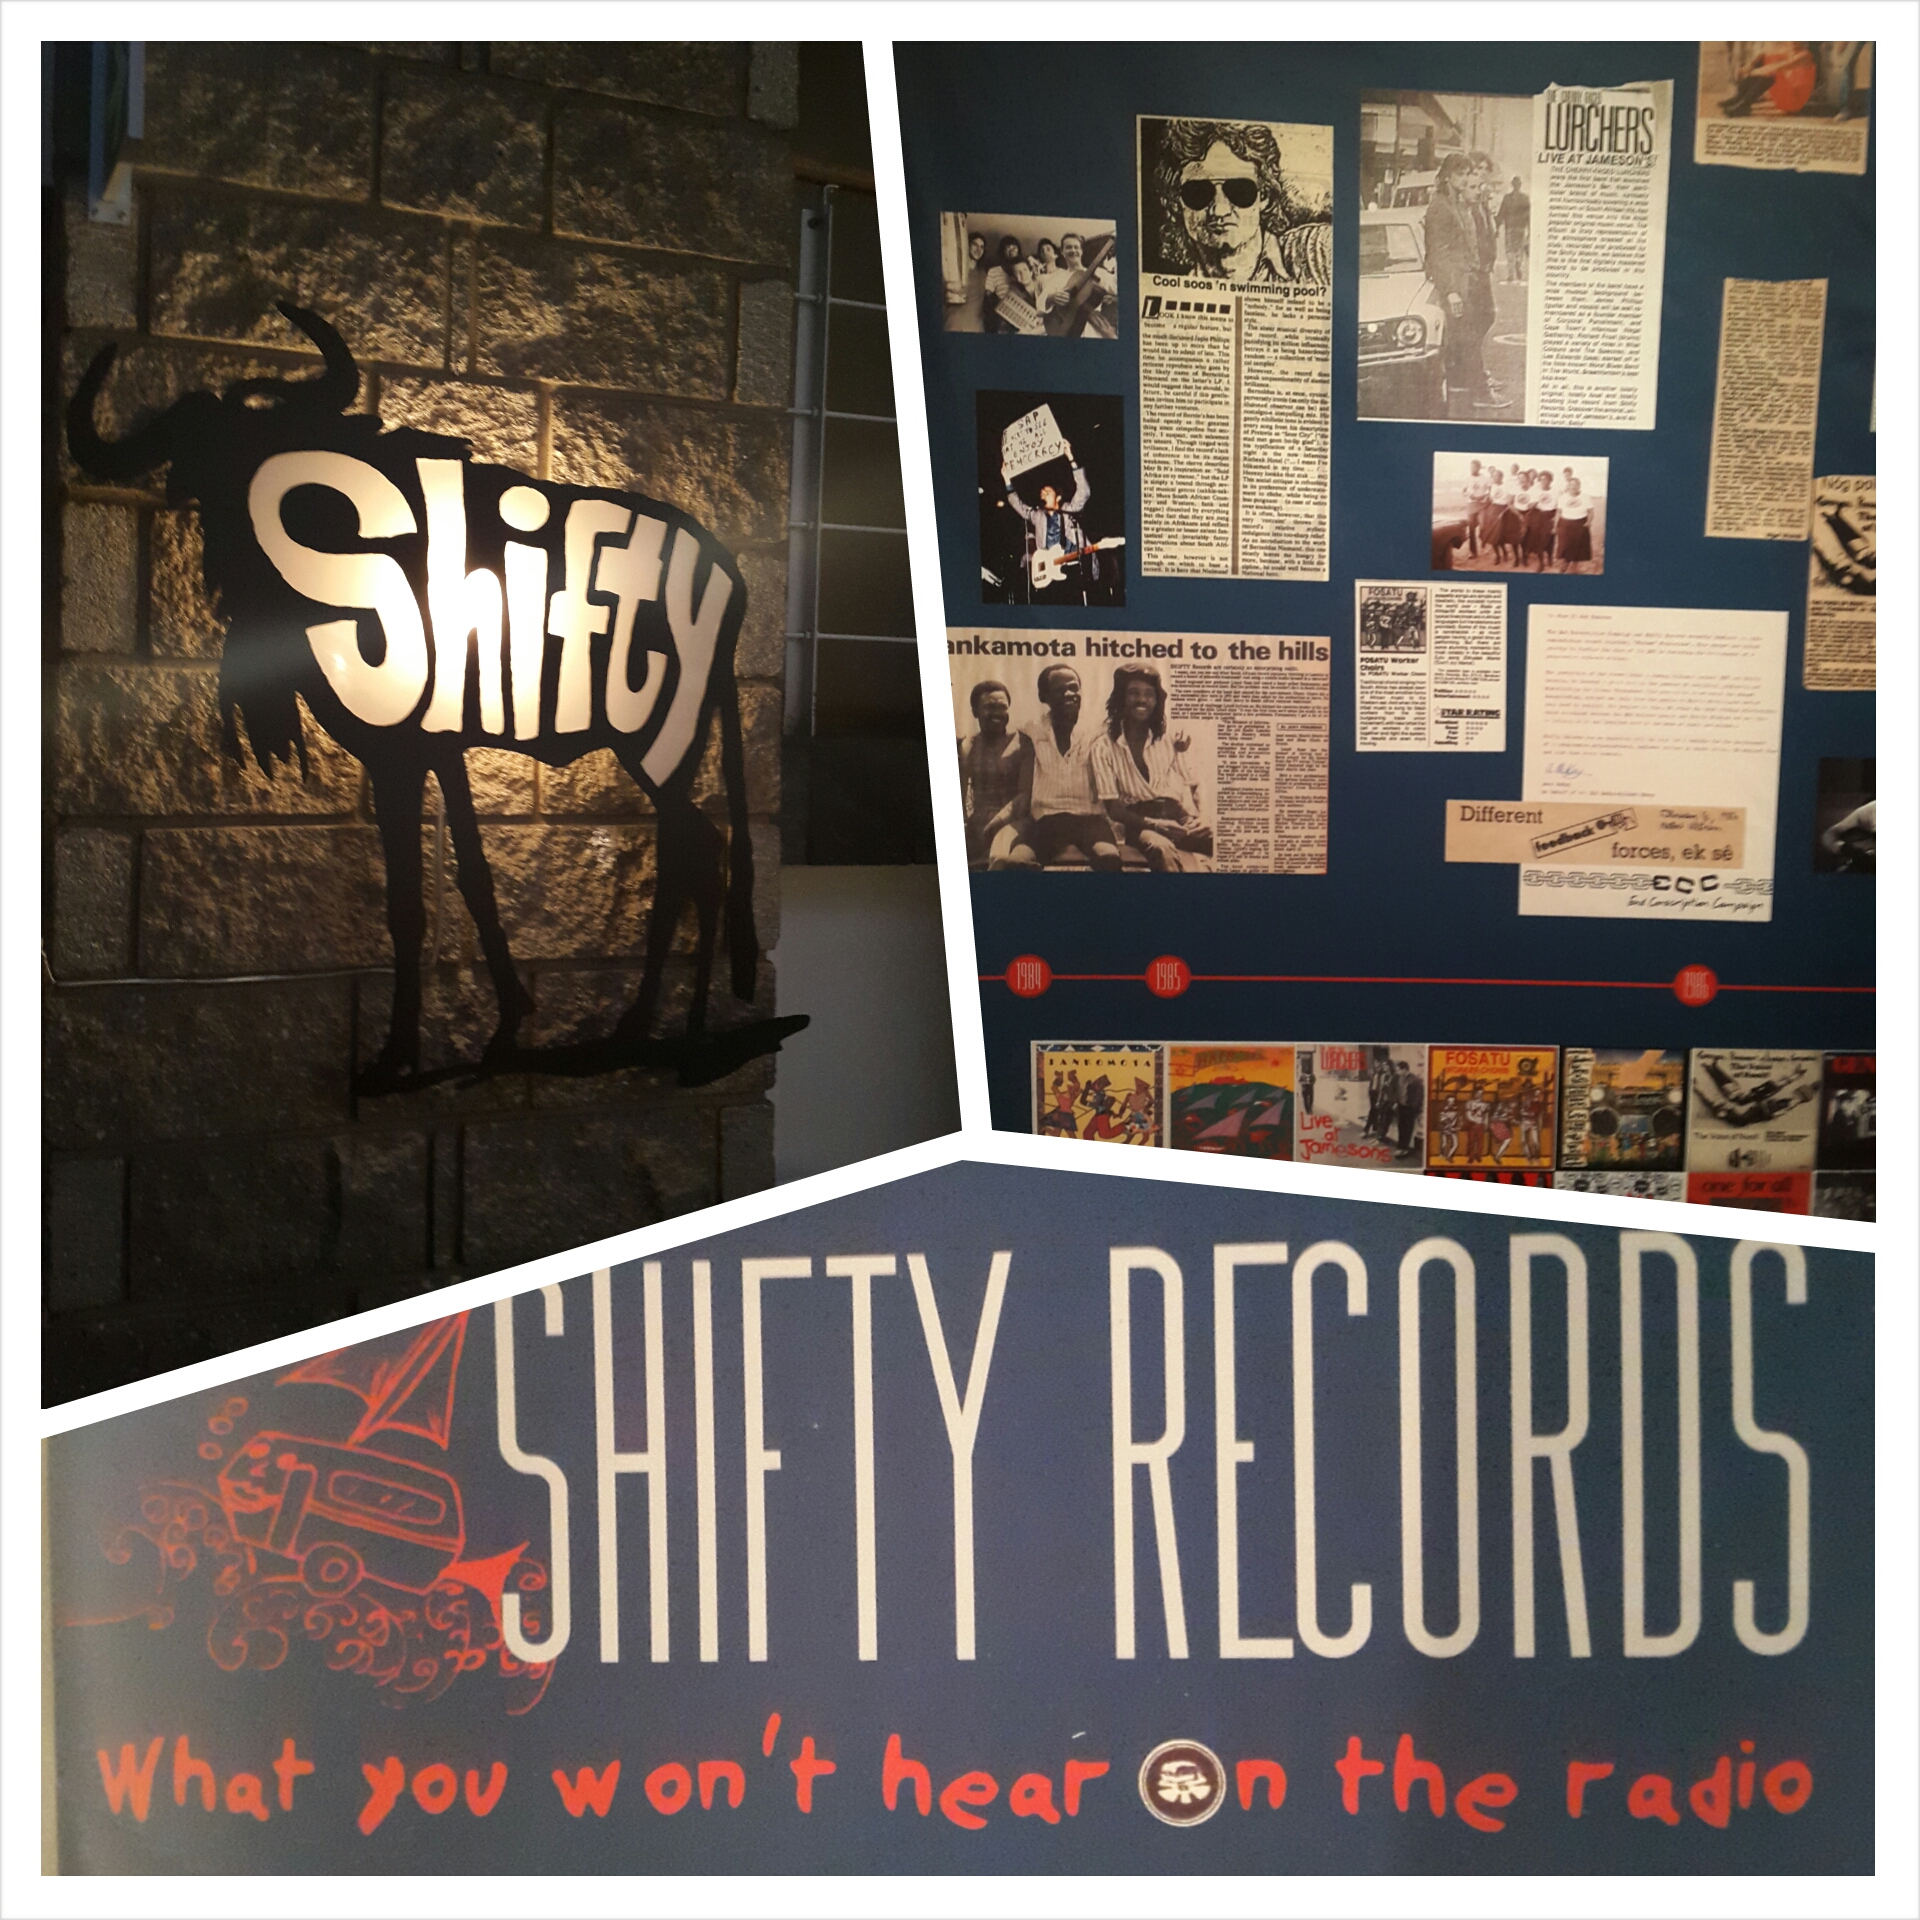 Collage from SAHA's physical exhibition on Shifty Records installed at Alliance Francaise in September 2014